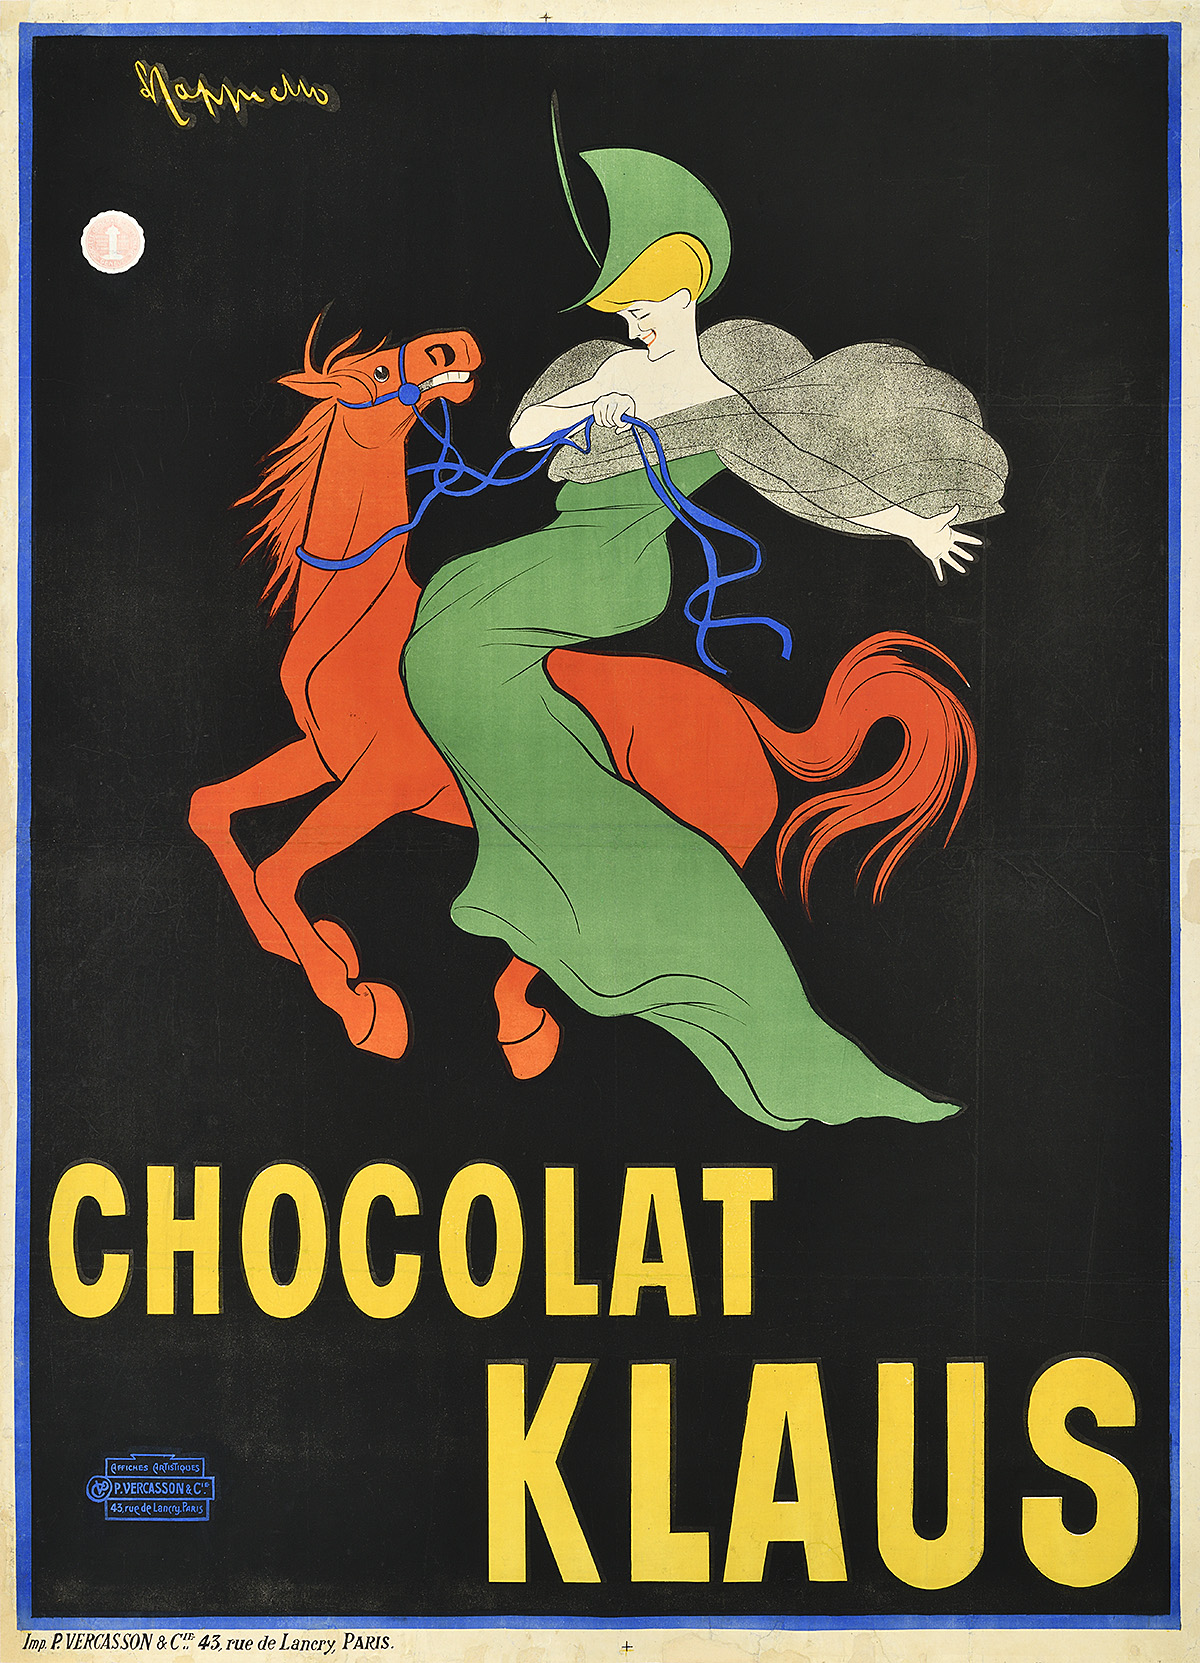 Illustrational poster of a woman in a green dress and hat riding a red horse with a blue rein, on a black background. At the bottom of the poster are the words 